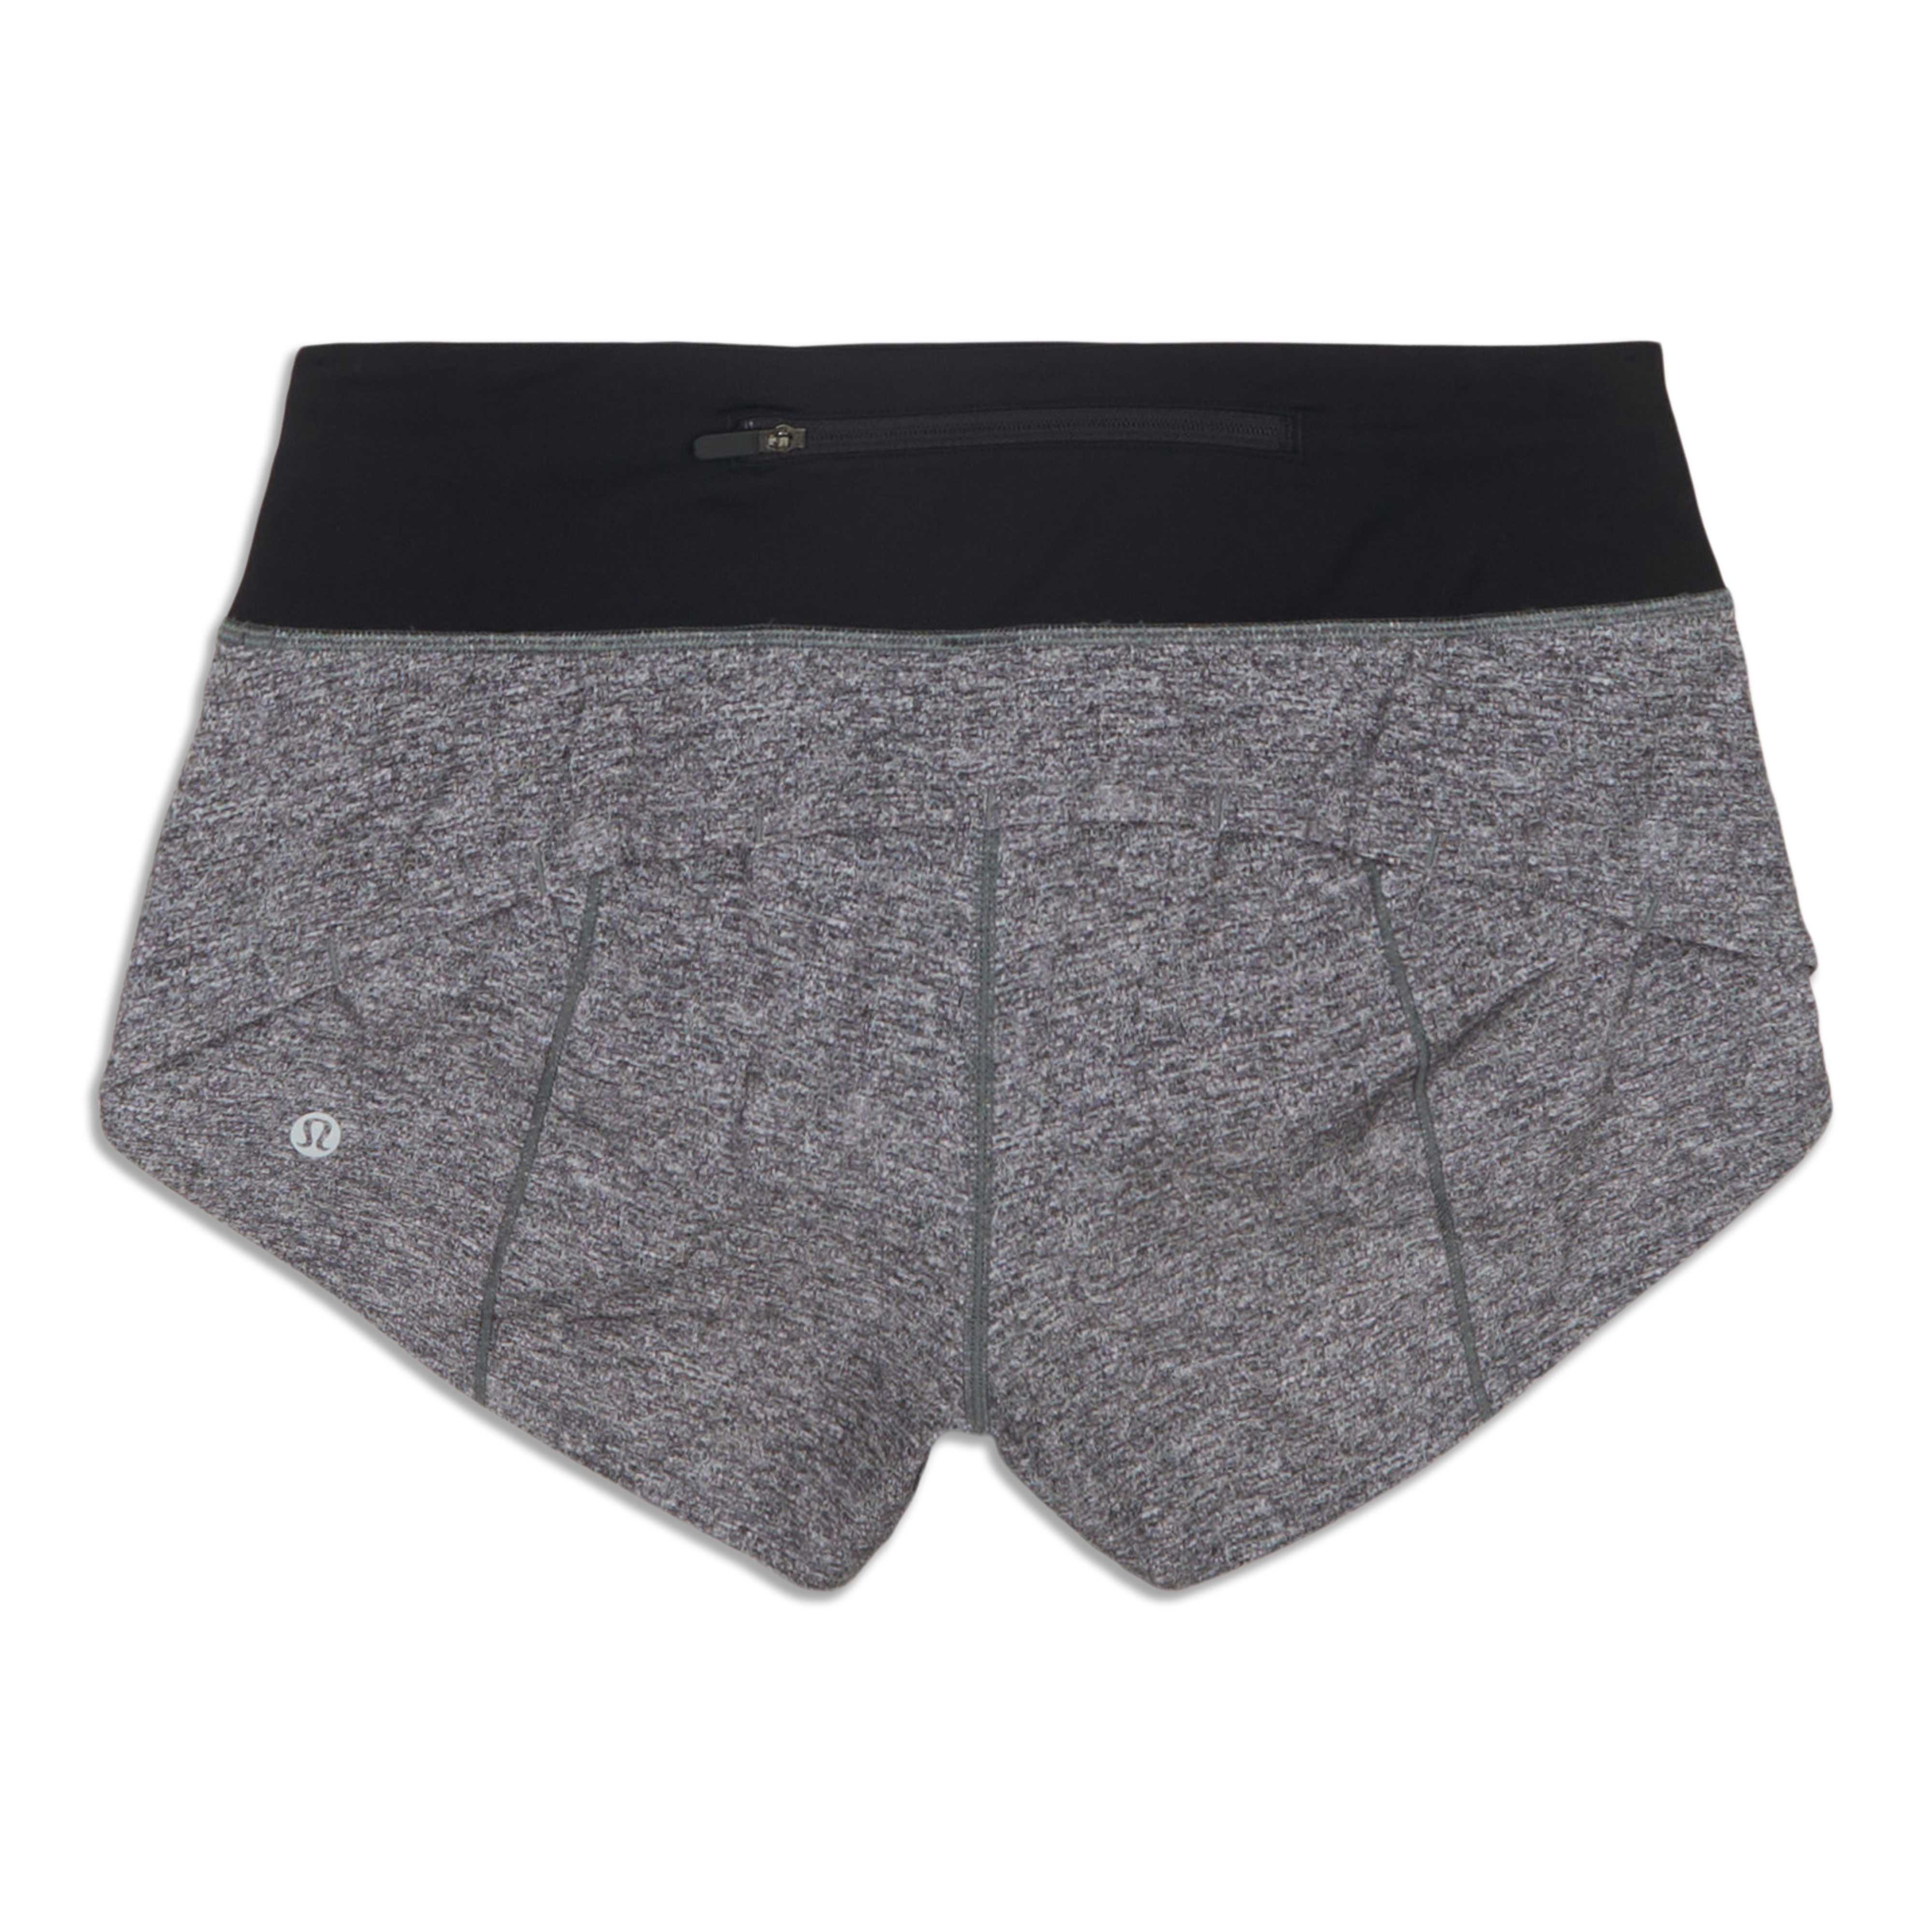 NEW LULULEMON Hotty Hot 4 Short HR 2 6 10 12 TALL Incognito Camo Grey Black